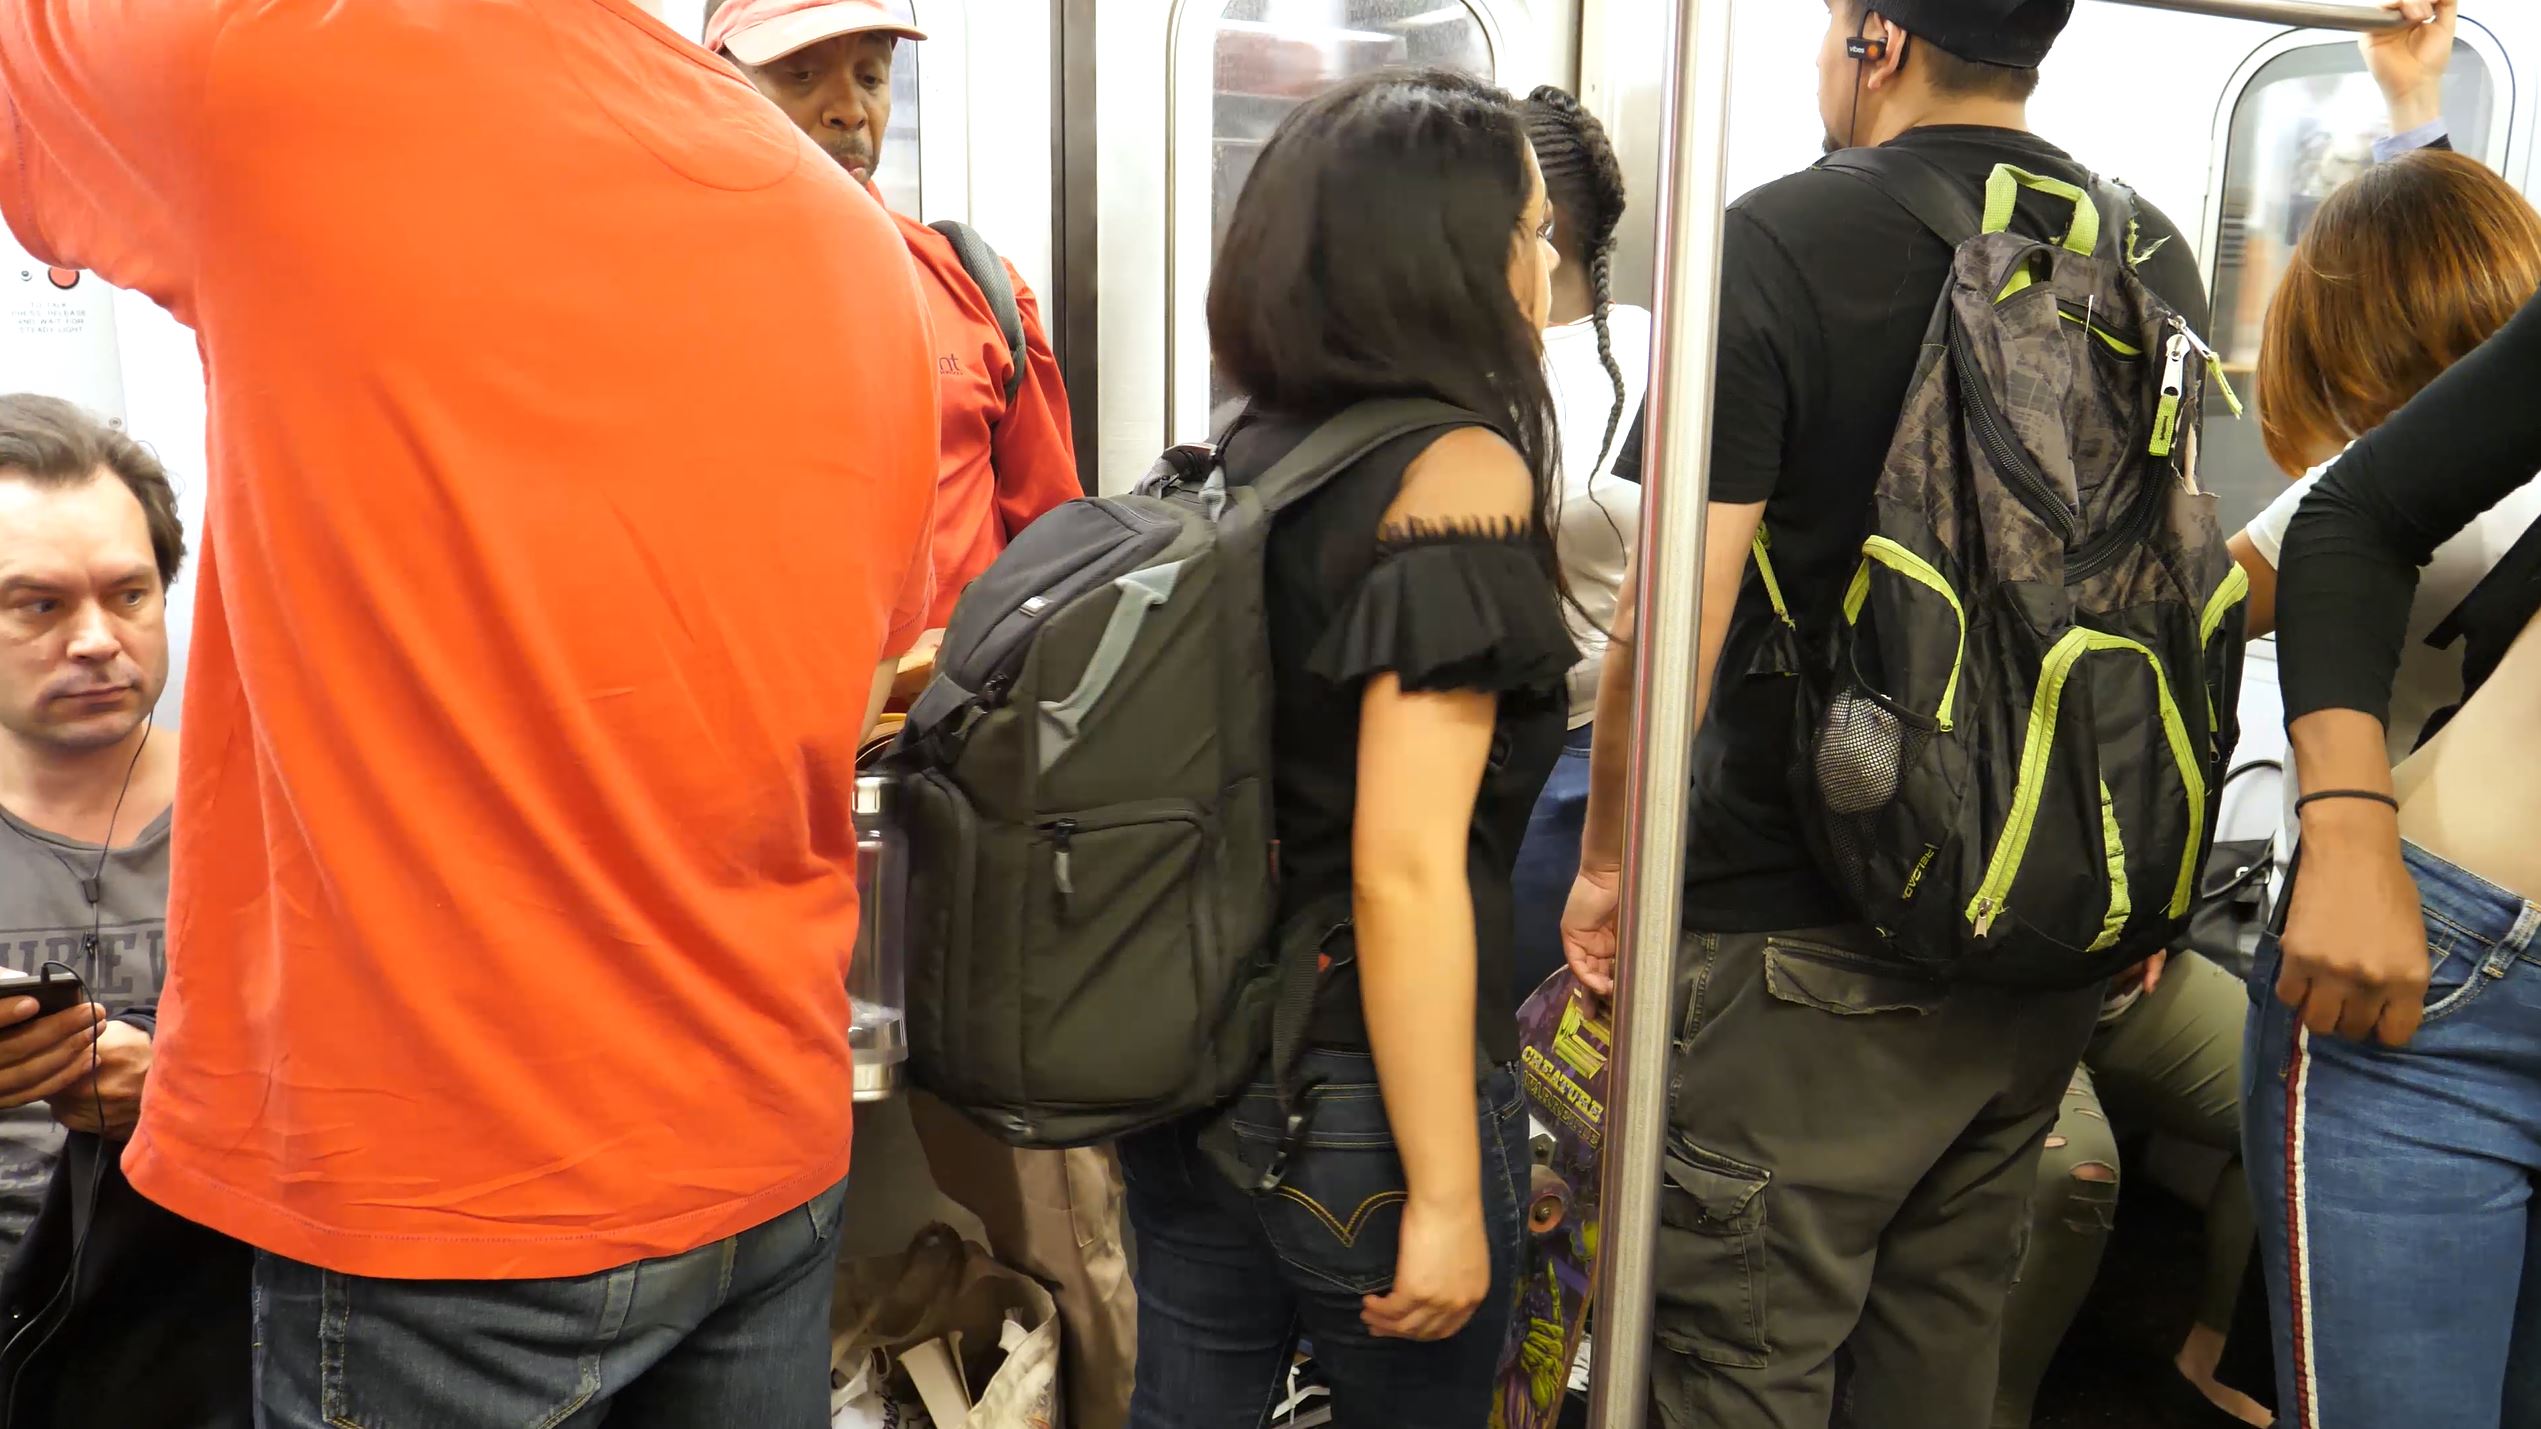 25 Things You Need to Know About the NYC Subway backpack